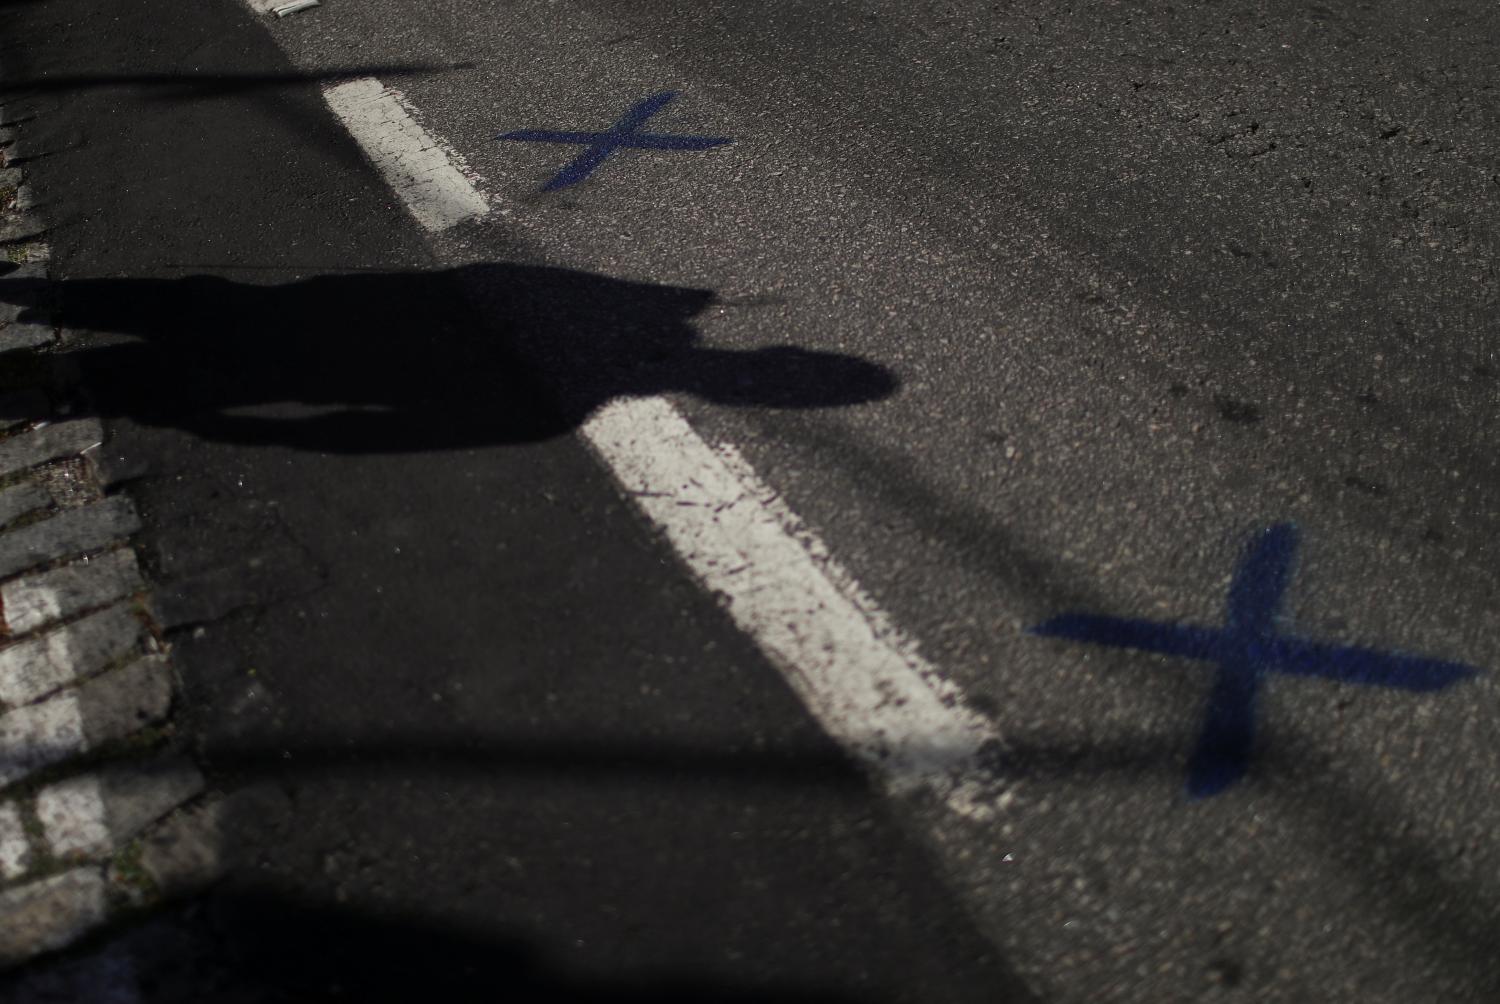 A silhouette of a person is seen next to the marks for social distancing outside the Caixa public bank, as people wait to receive emergency aid given by the federal government to the most vulnerable, following the coronavirus disease (COVID-19) outbreak, in Rio de Janeiro, Brazil May 5, 2020. REUTERS/Pilar Olivares